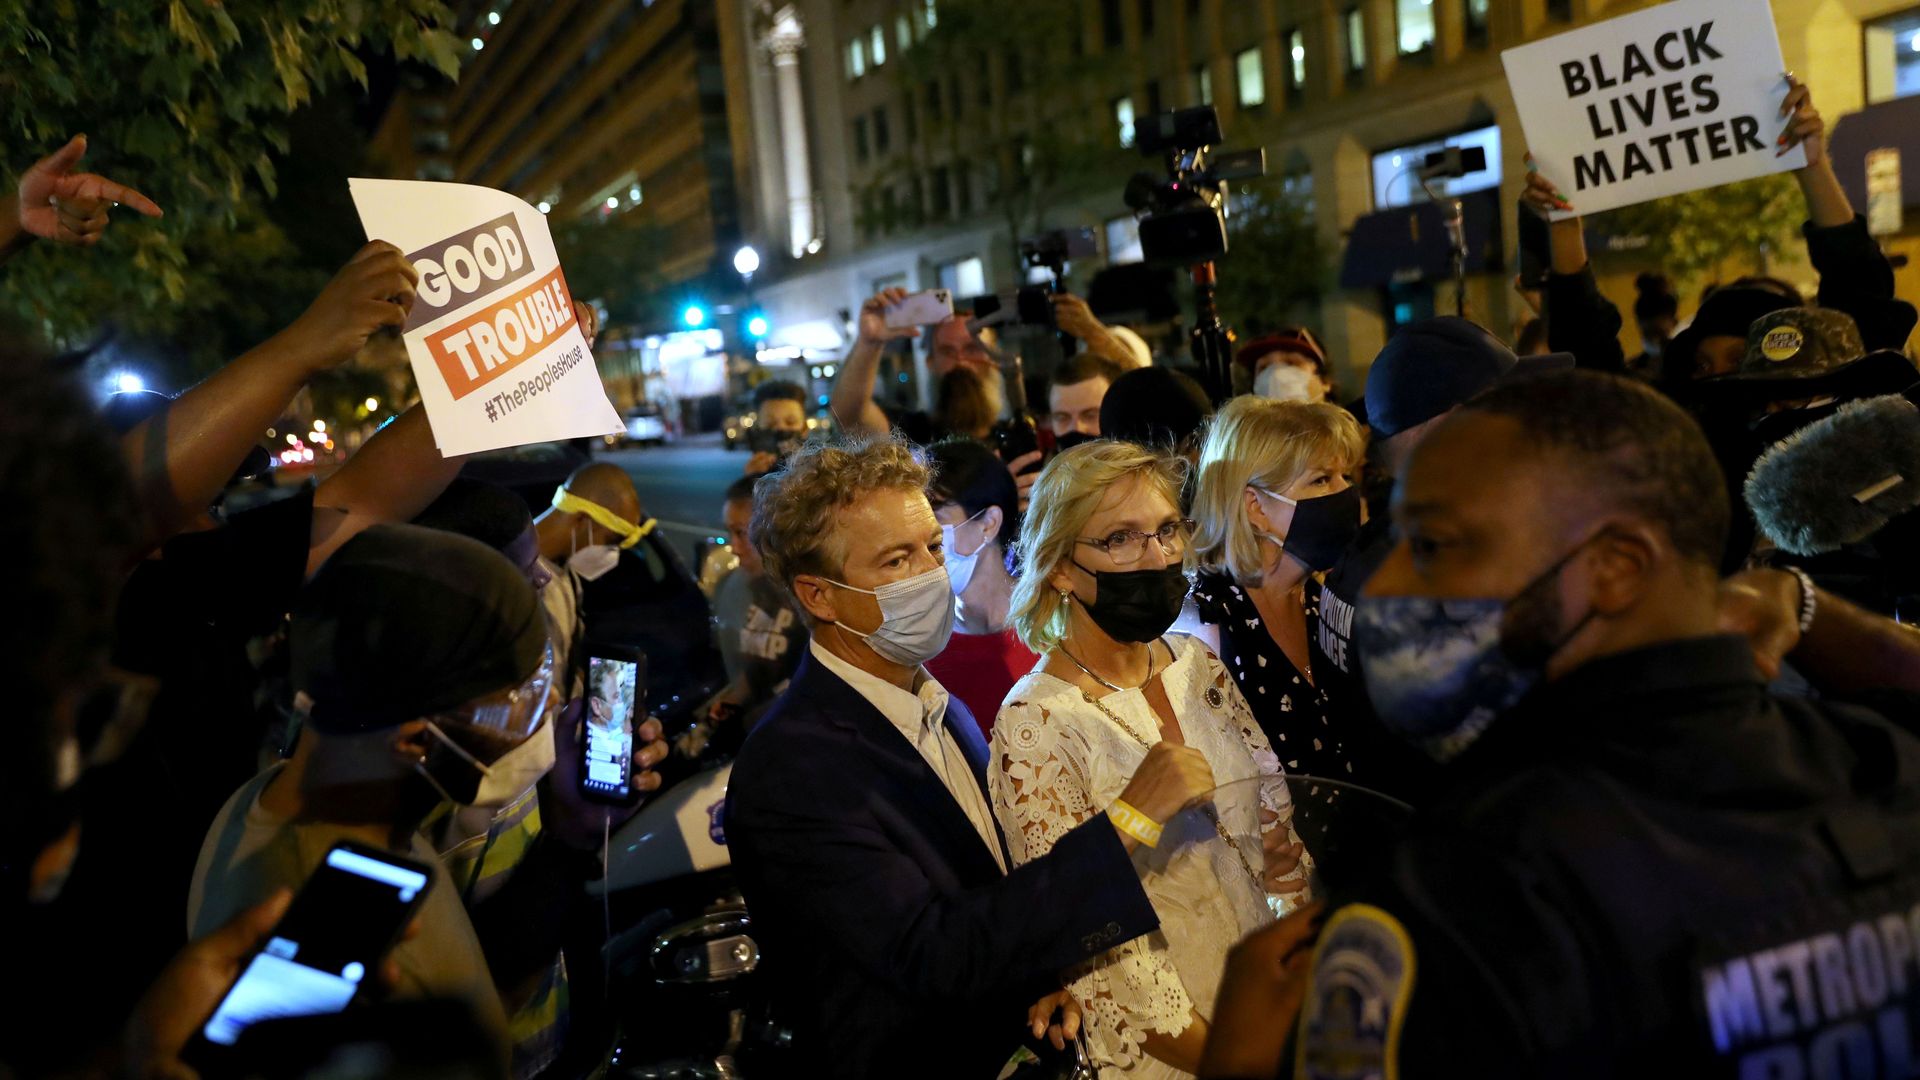 Rand Paul surrounded by a crowd of protesters